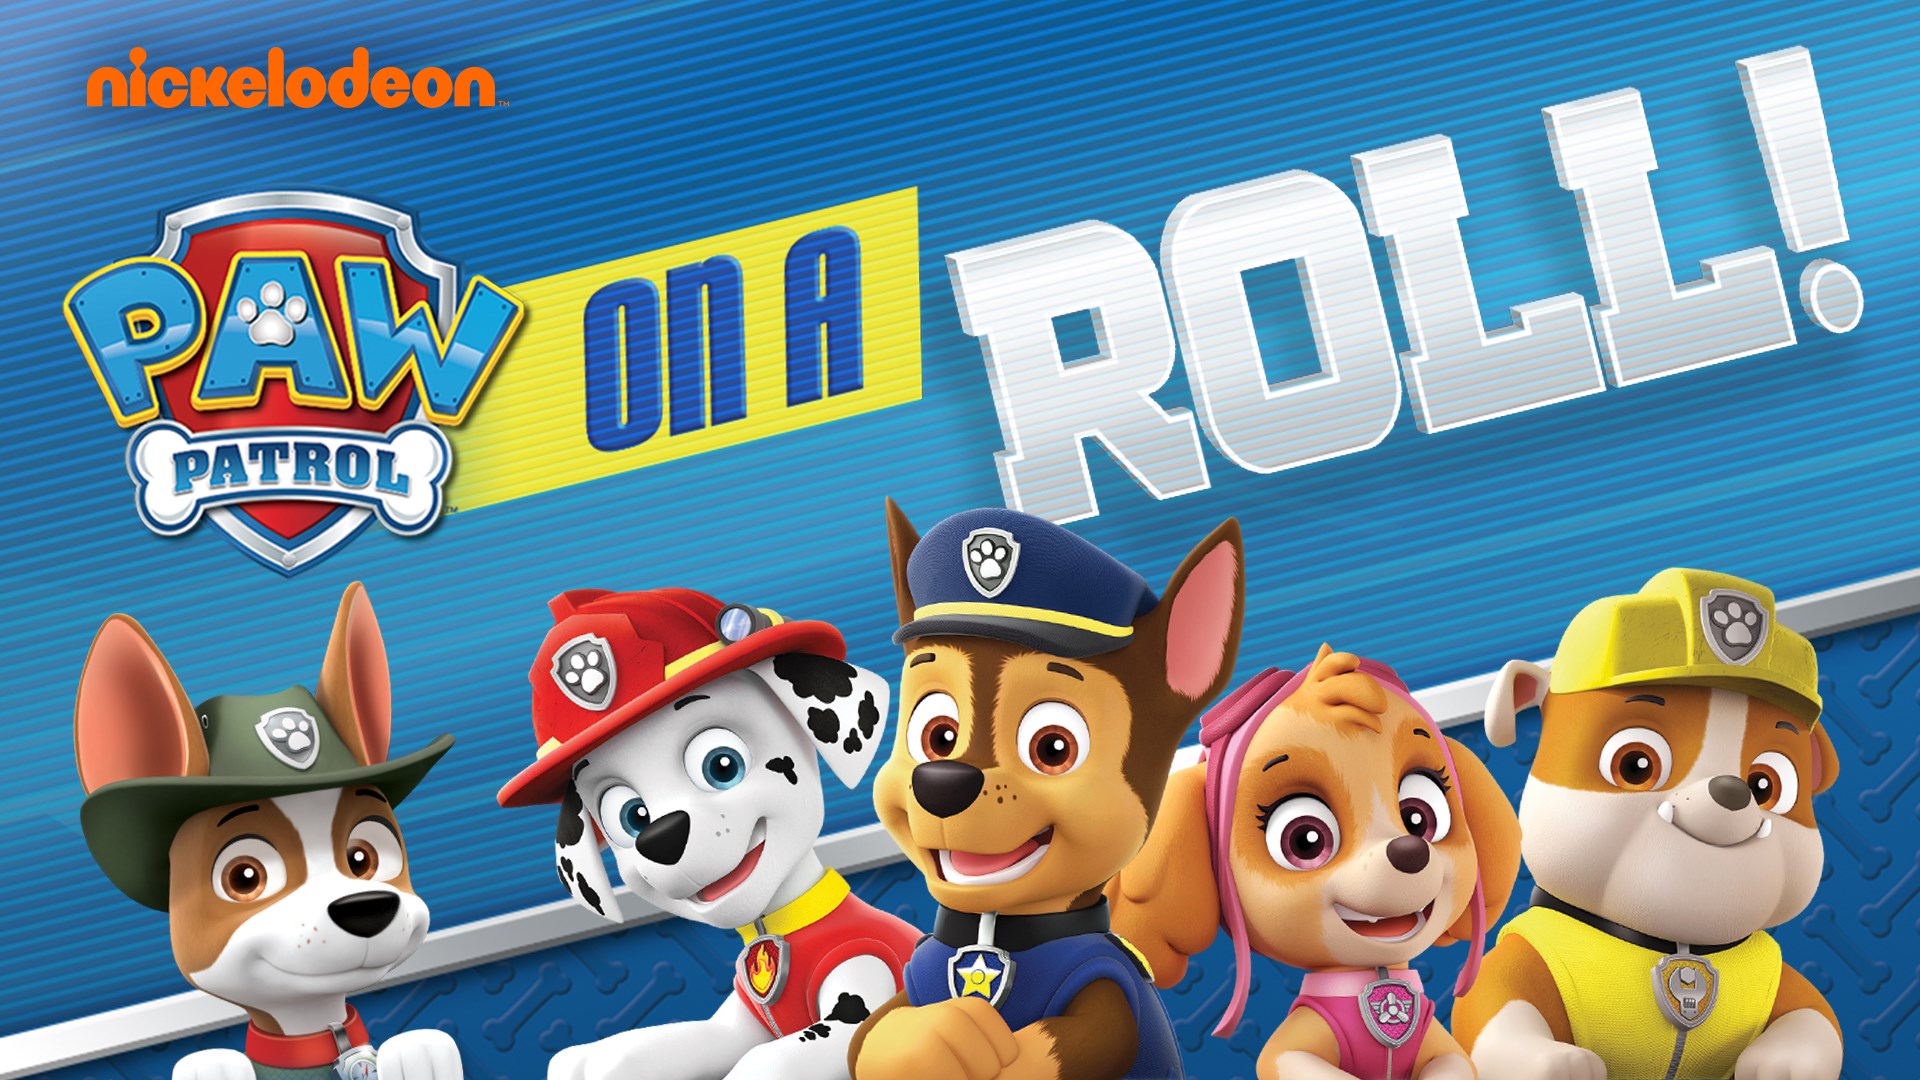 Paw Patrol: On a Roll and Crayola Scoot